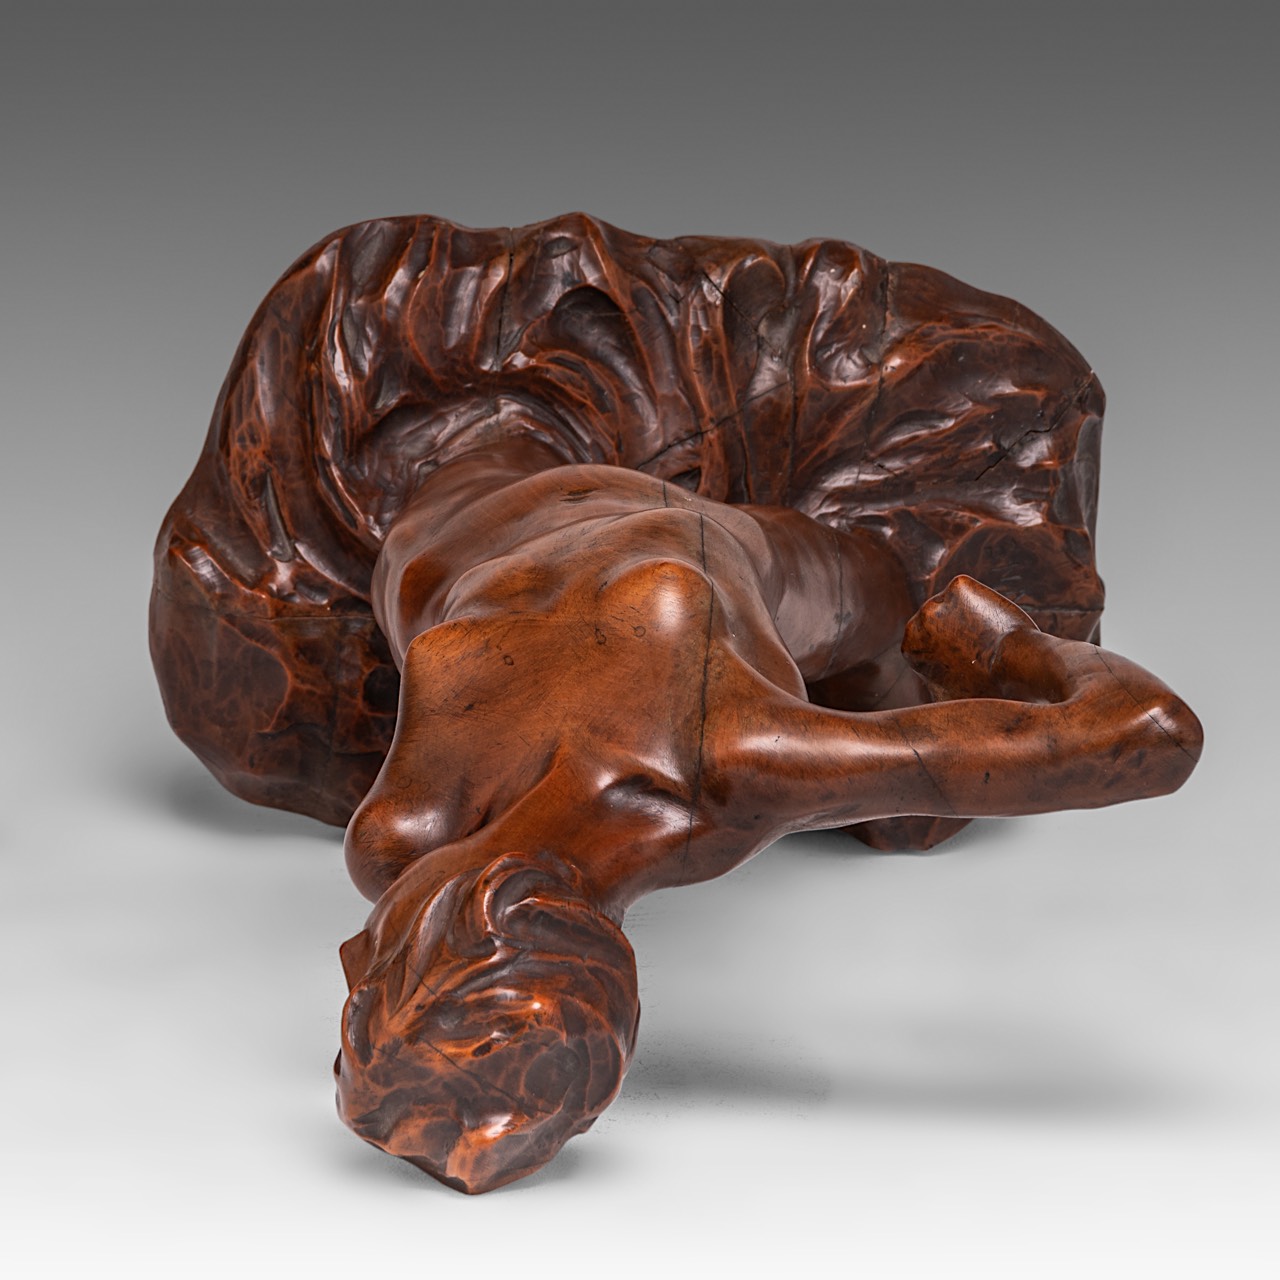 George Minne (1866-1941), 'Baigneuse I', carved wood, H 40 cm - Image 7 of 10